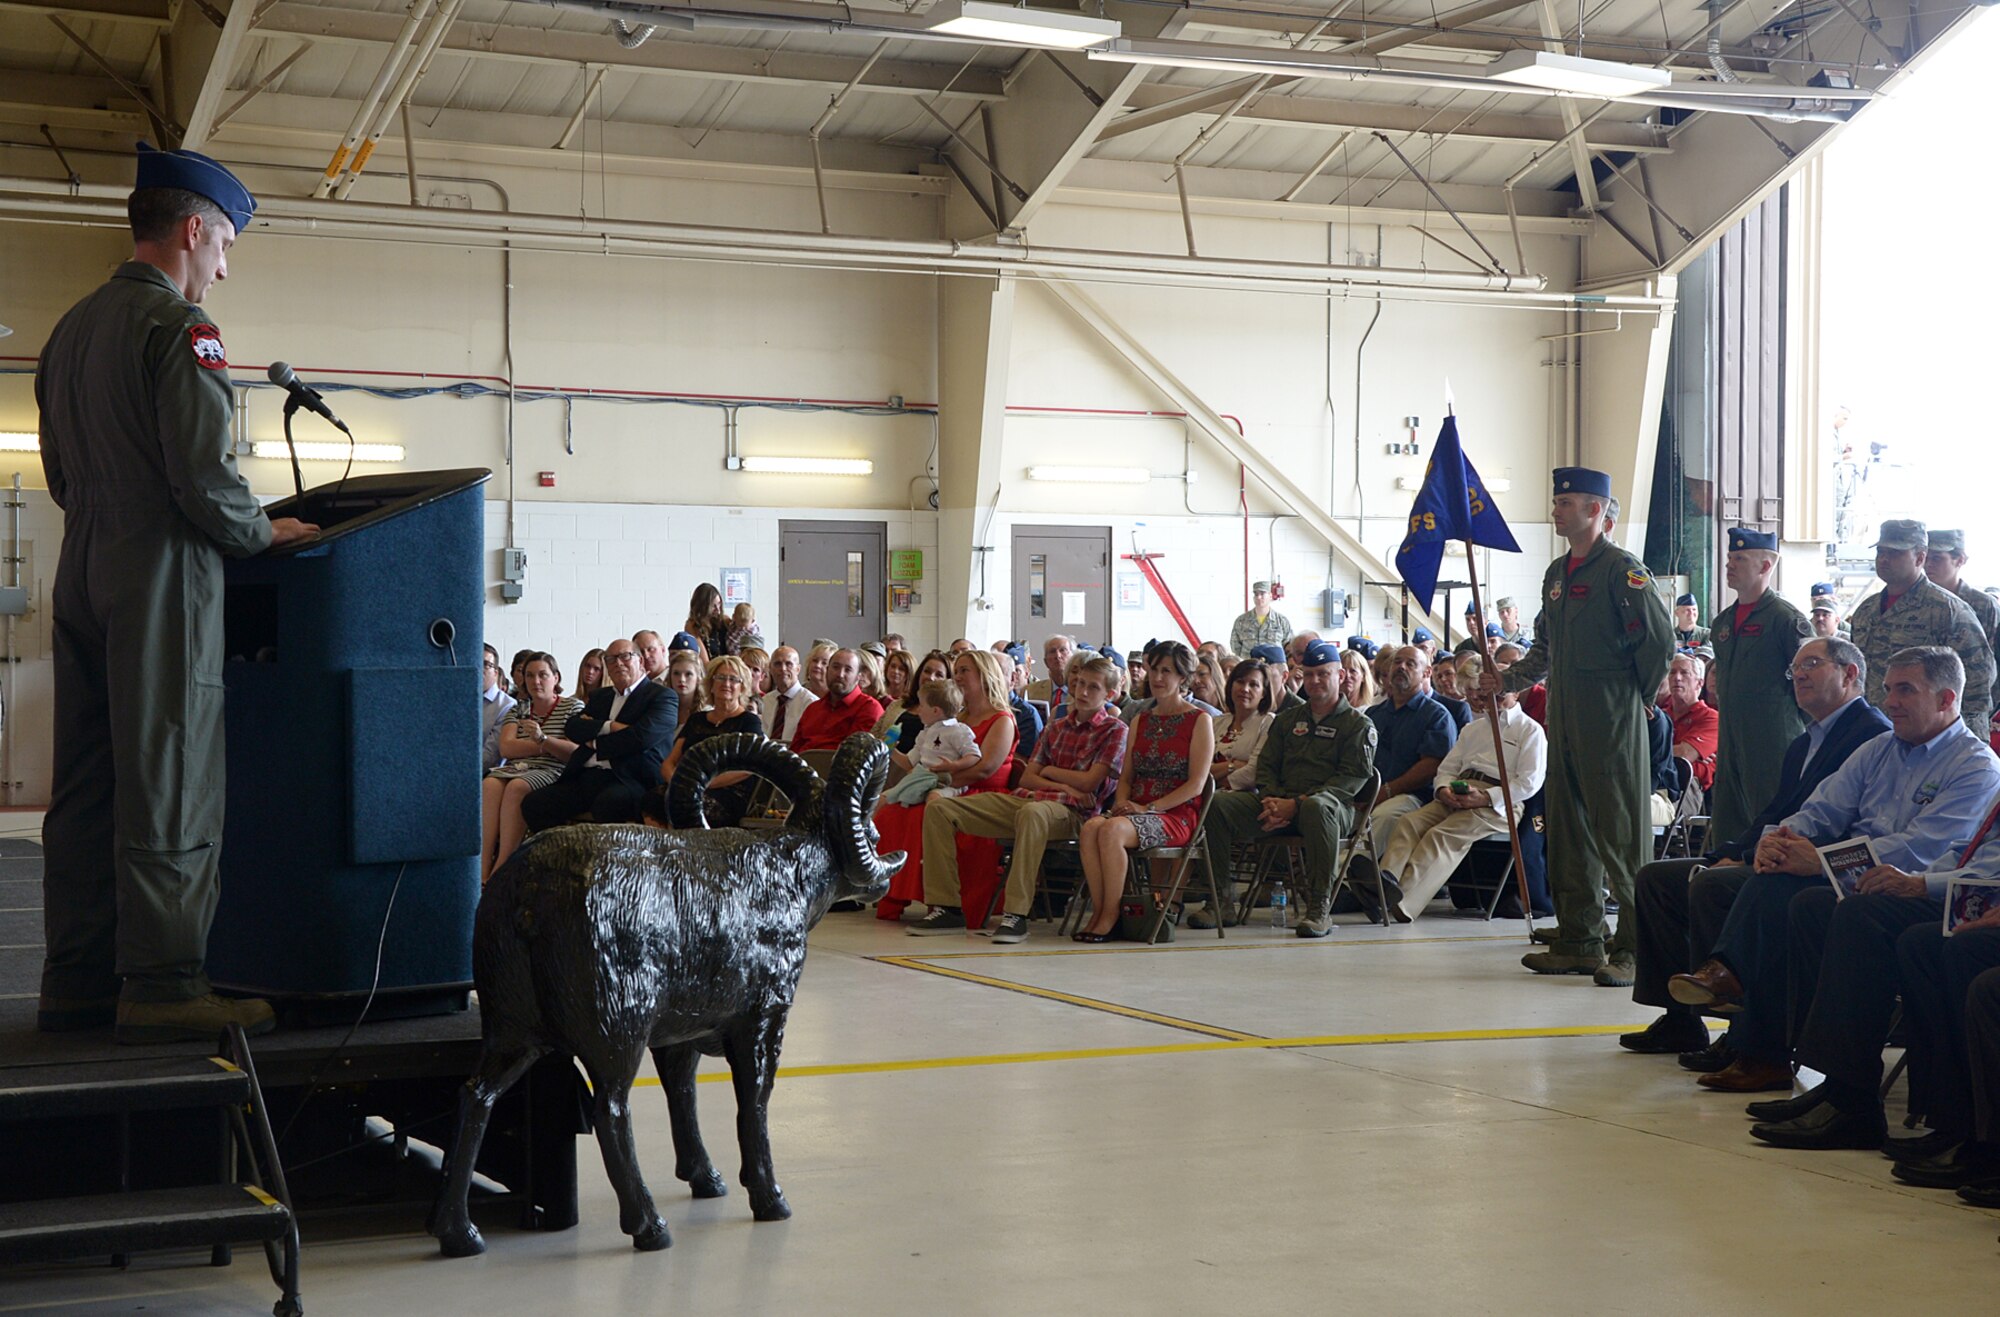 Lt. Col. George R. Watkins addresses the audience and squadron members during the 34th Fighter Squadron activation ceremony July 17, 2015, at Hill Air Force Base, Utah. The 34th FS will be the first combat squadron to fly the Air Force’s newest fighter aircraft, the F-35A Lightning II. (U.S. Air Force photo/Alex R. Lloyd)